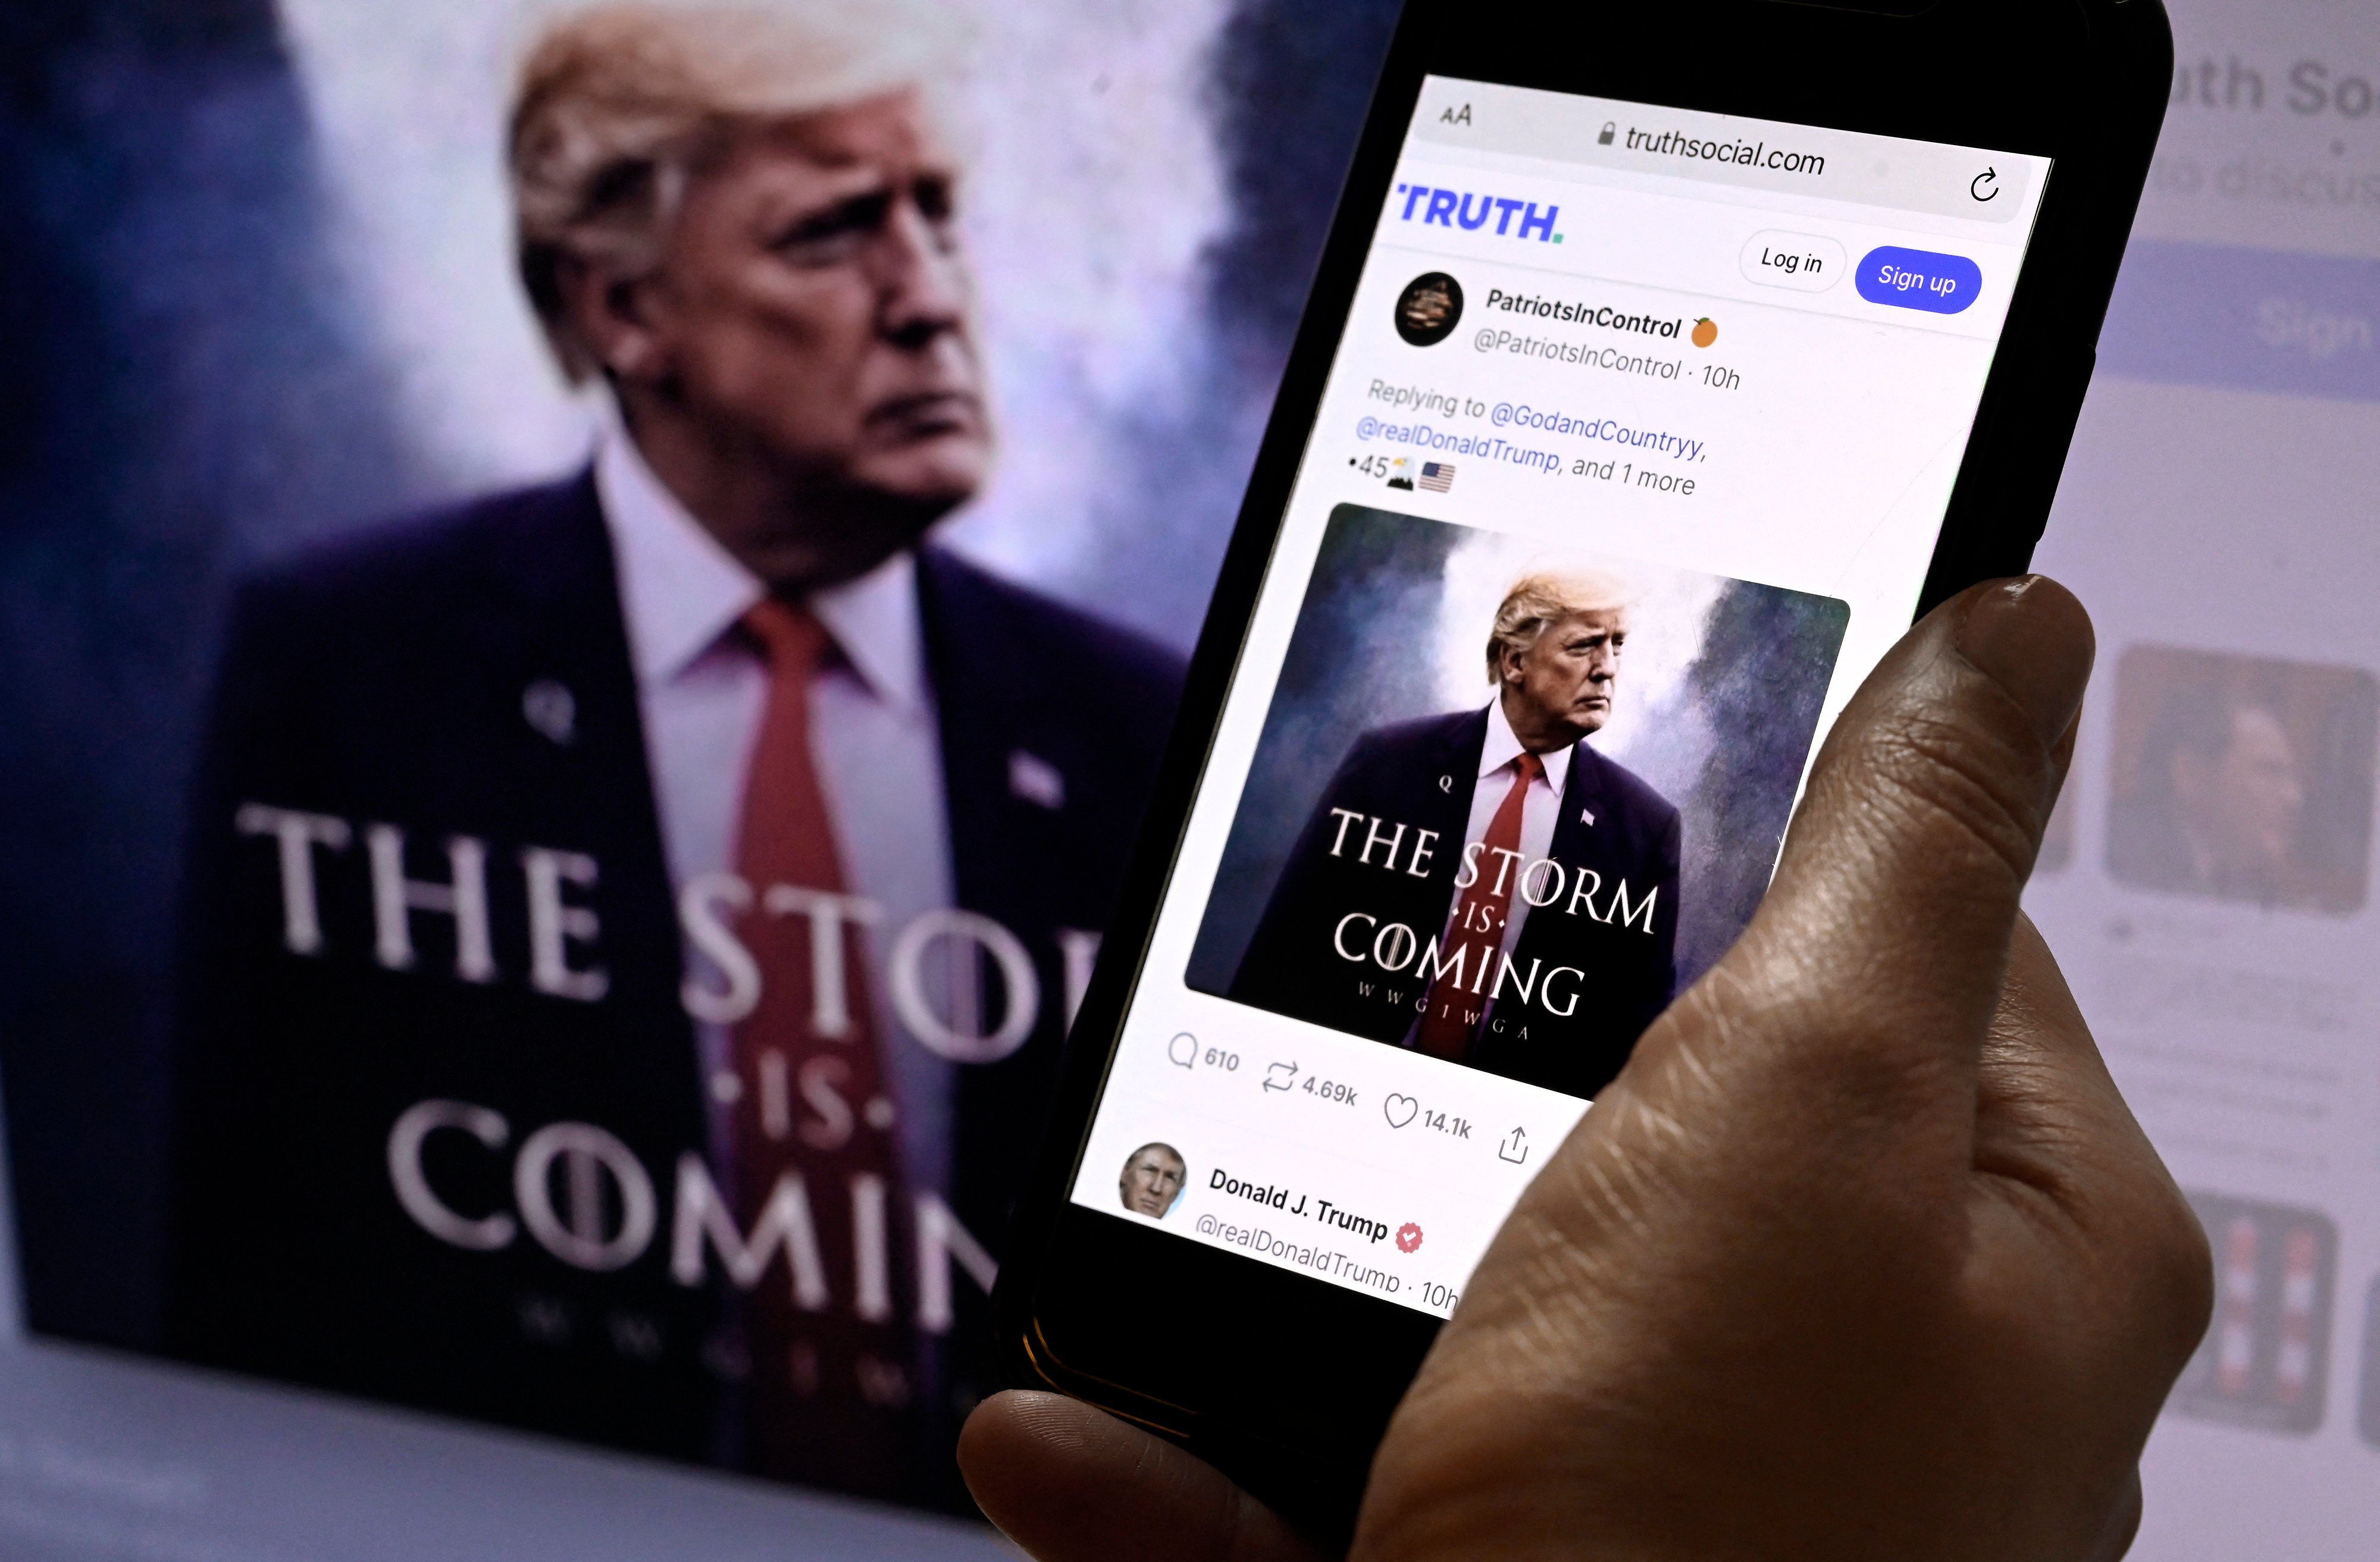 Former US president Donald Trump’s Truth Social account on a mobile device with an image of Trump in the background in Washington, DC on September 13, 2022. Photo: AFP